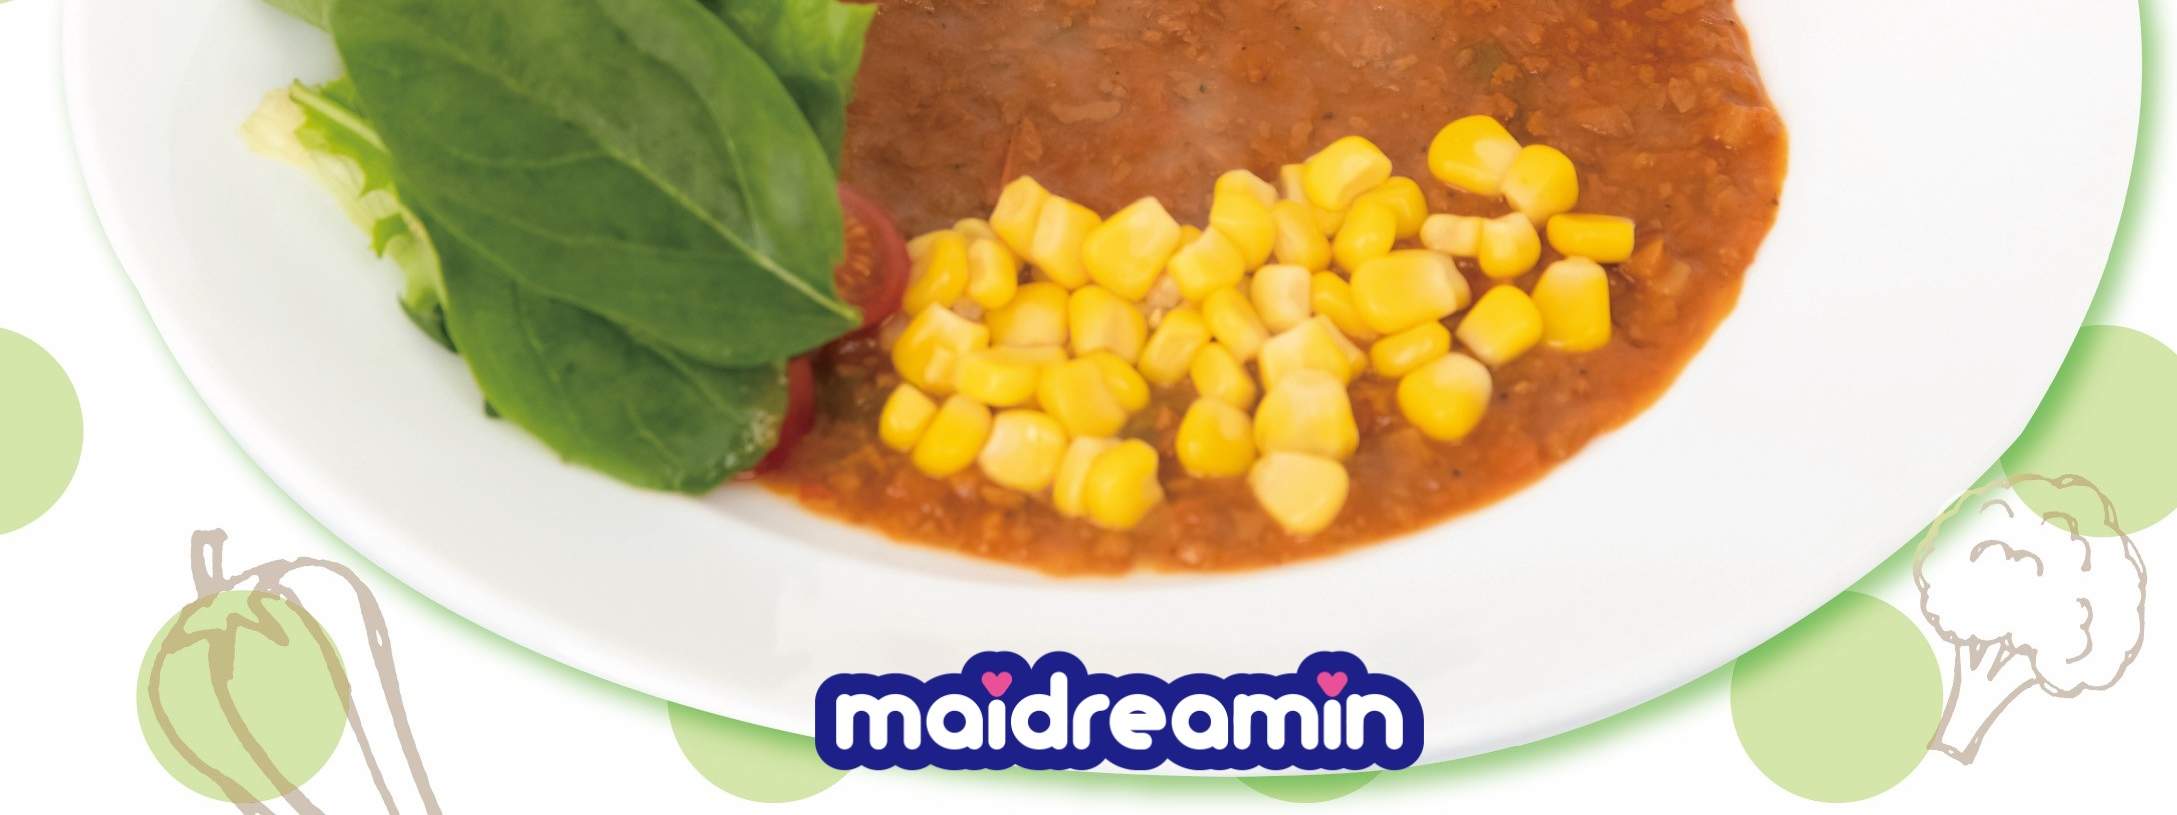 Vegetarian curry is available in limited quantities at each store. Please feel free to ask the maid! (Gluten-free, allergies cannot be accommodated)